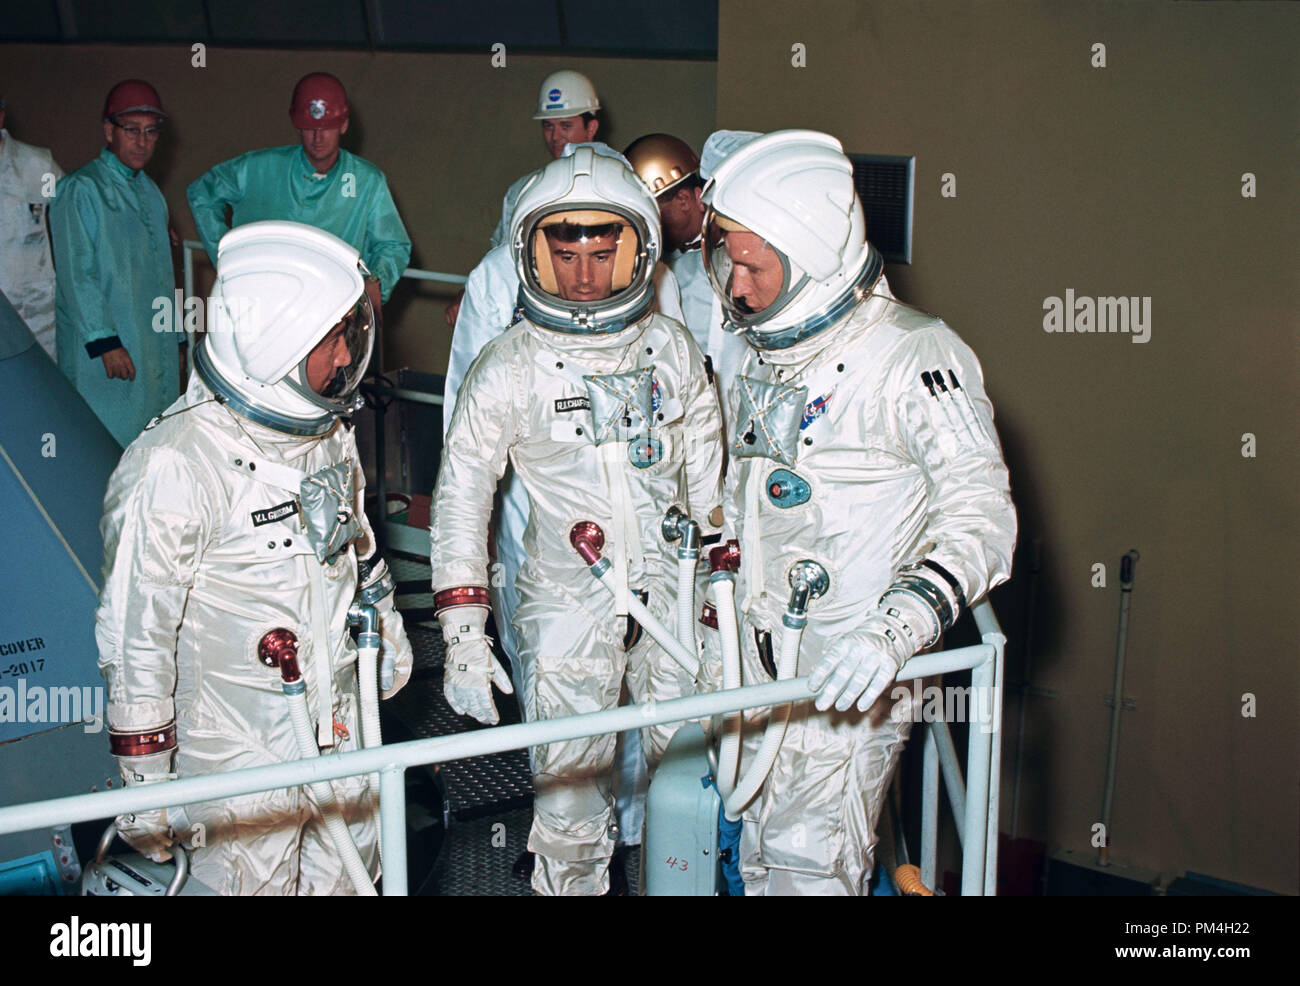 (August 1966) --- The three crew members for the Apollo-Saturn 204 (AS-204) mission check out the couch installation on the Apollo Command Module (CM) at North American's Downey facility. Left to right in their pressurized space suits are astronauts Virgil I. Grissom, Roger B. Chaffee and Edward H. White II. Editor's Note: The three astronauts died in a fire on the launch pad, Jan. 27, 1967.   File Reference # 1003 185THA Stock Photo